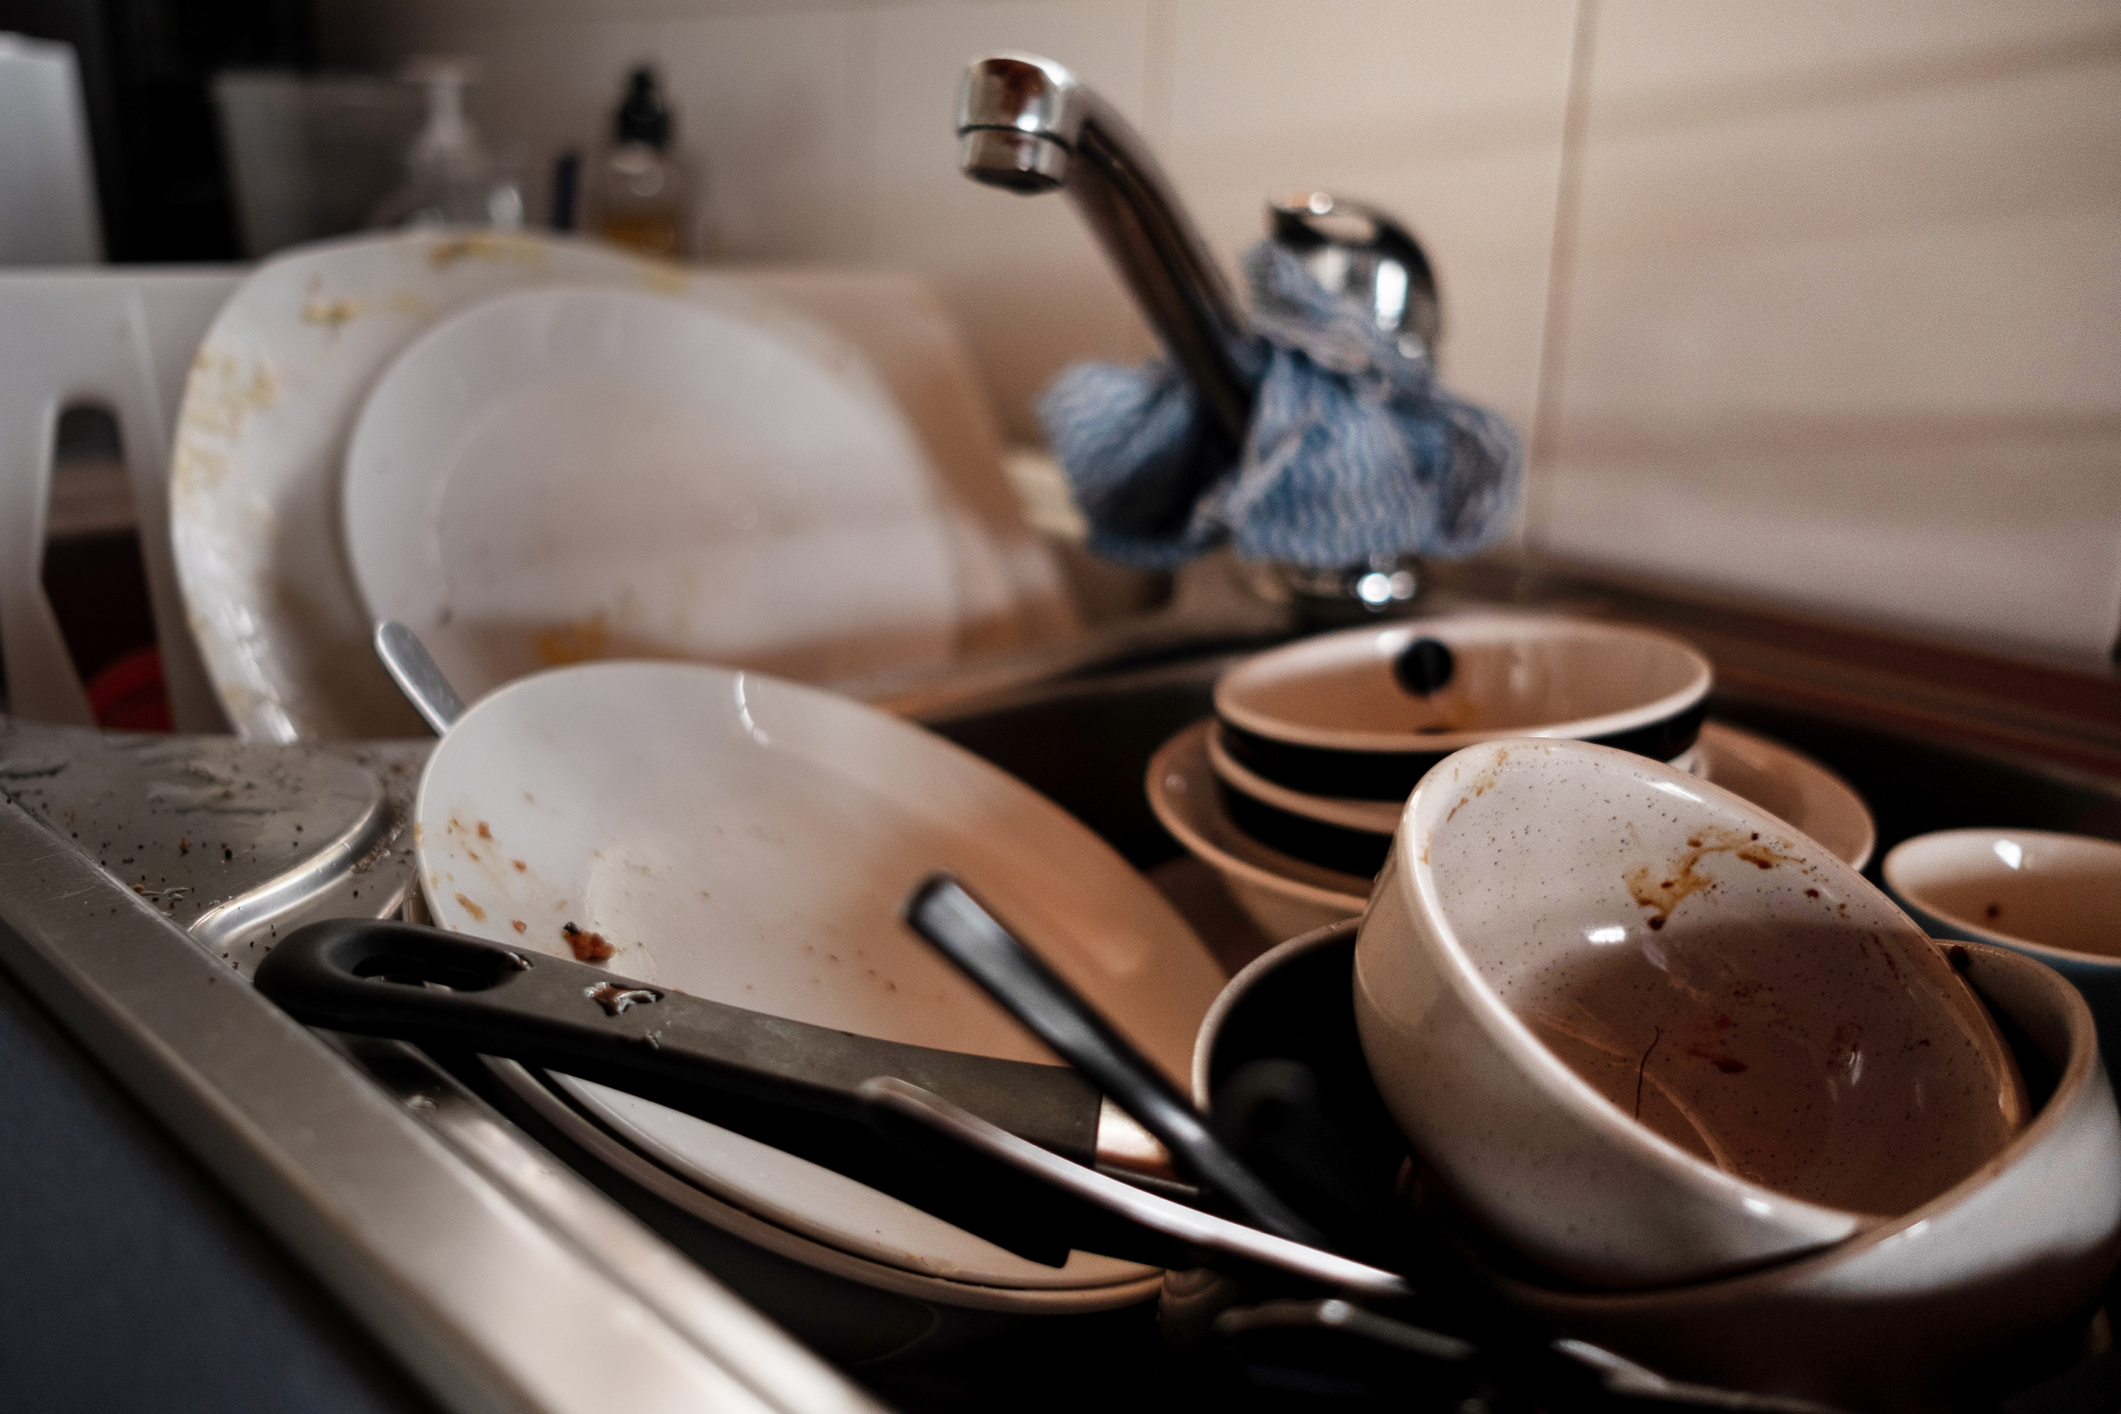 Грязная посуда глубокие тарелки. Unwashed dishes. Pile of Dirty dishes. Man with Dirty dishes.